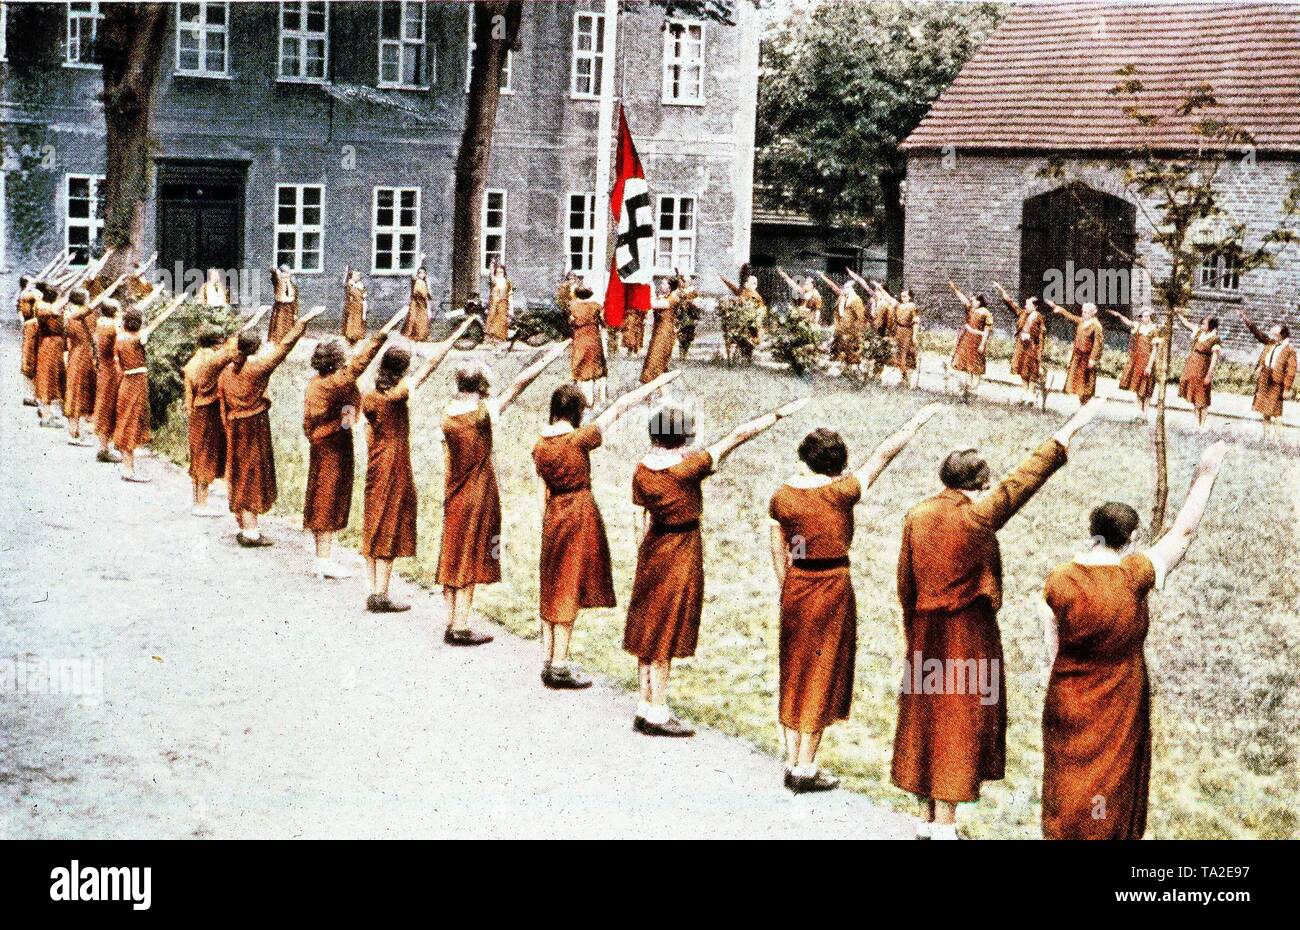 BDM girls during the daily morning roll call hoisting the swastika flag on the forecourt of a Landjahrheim of the NSDAP. In 1939 the compulsory year was introduced for most German girls and women under 25 years. Stock Photo